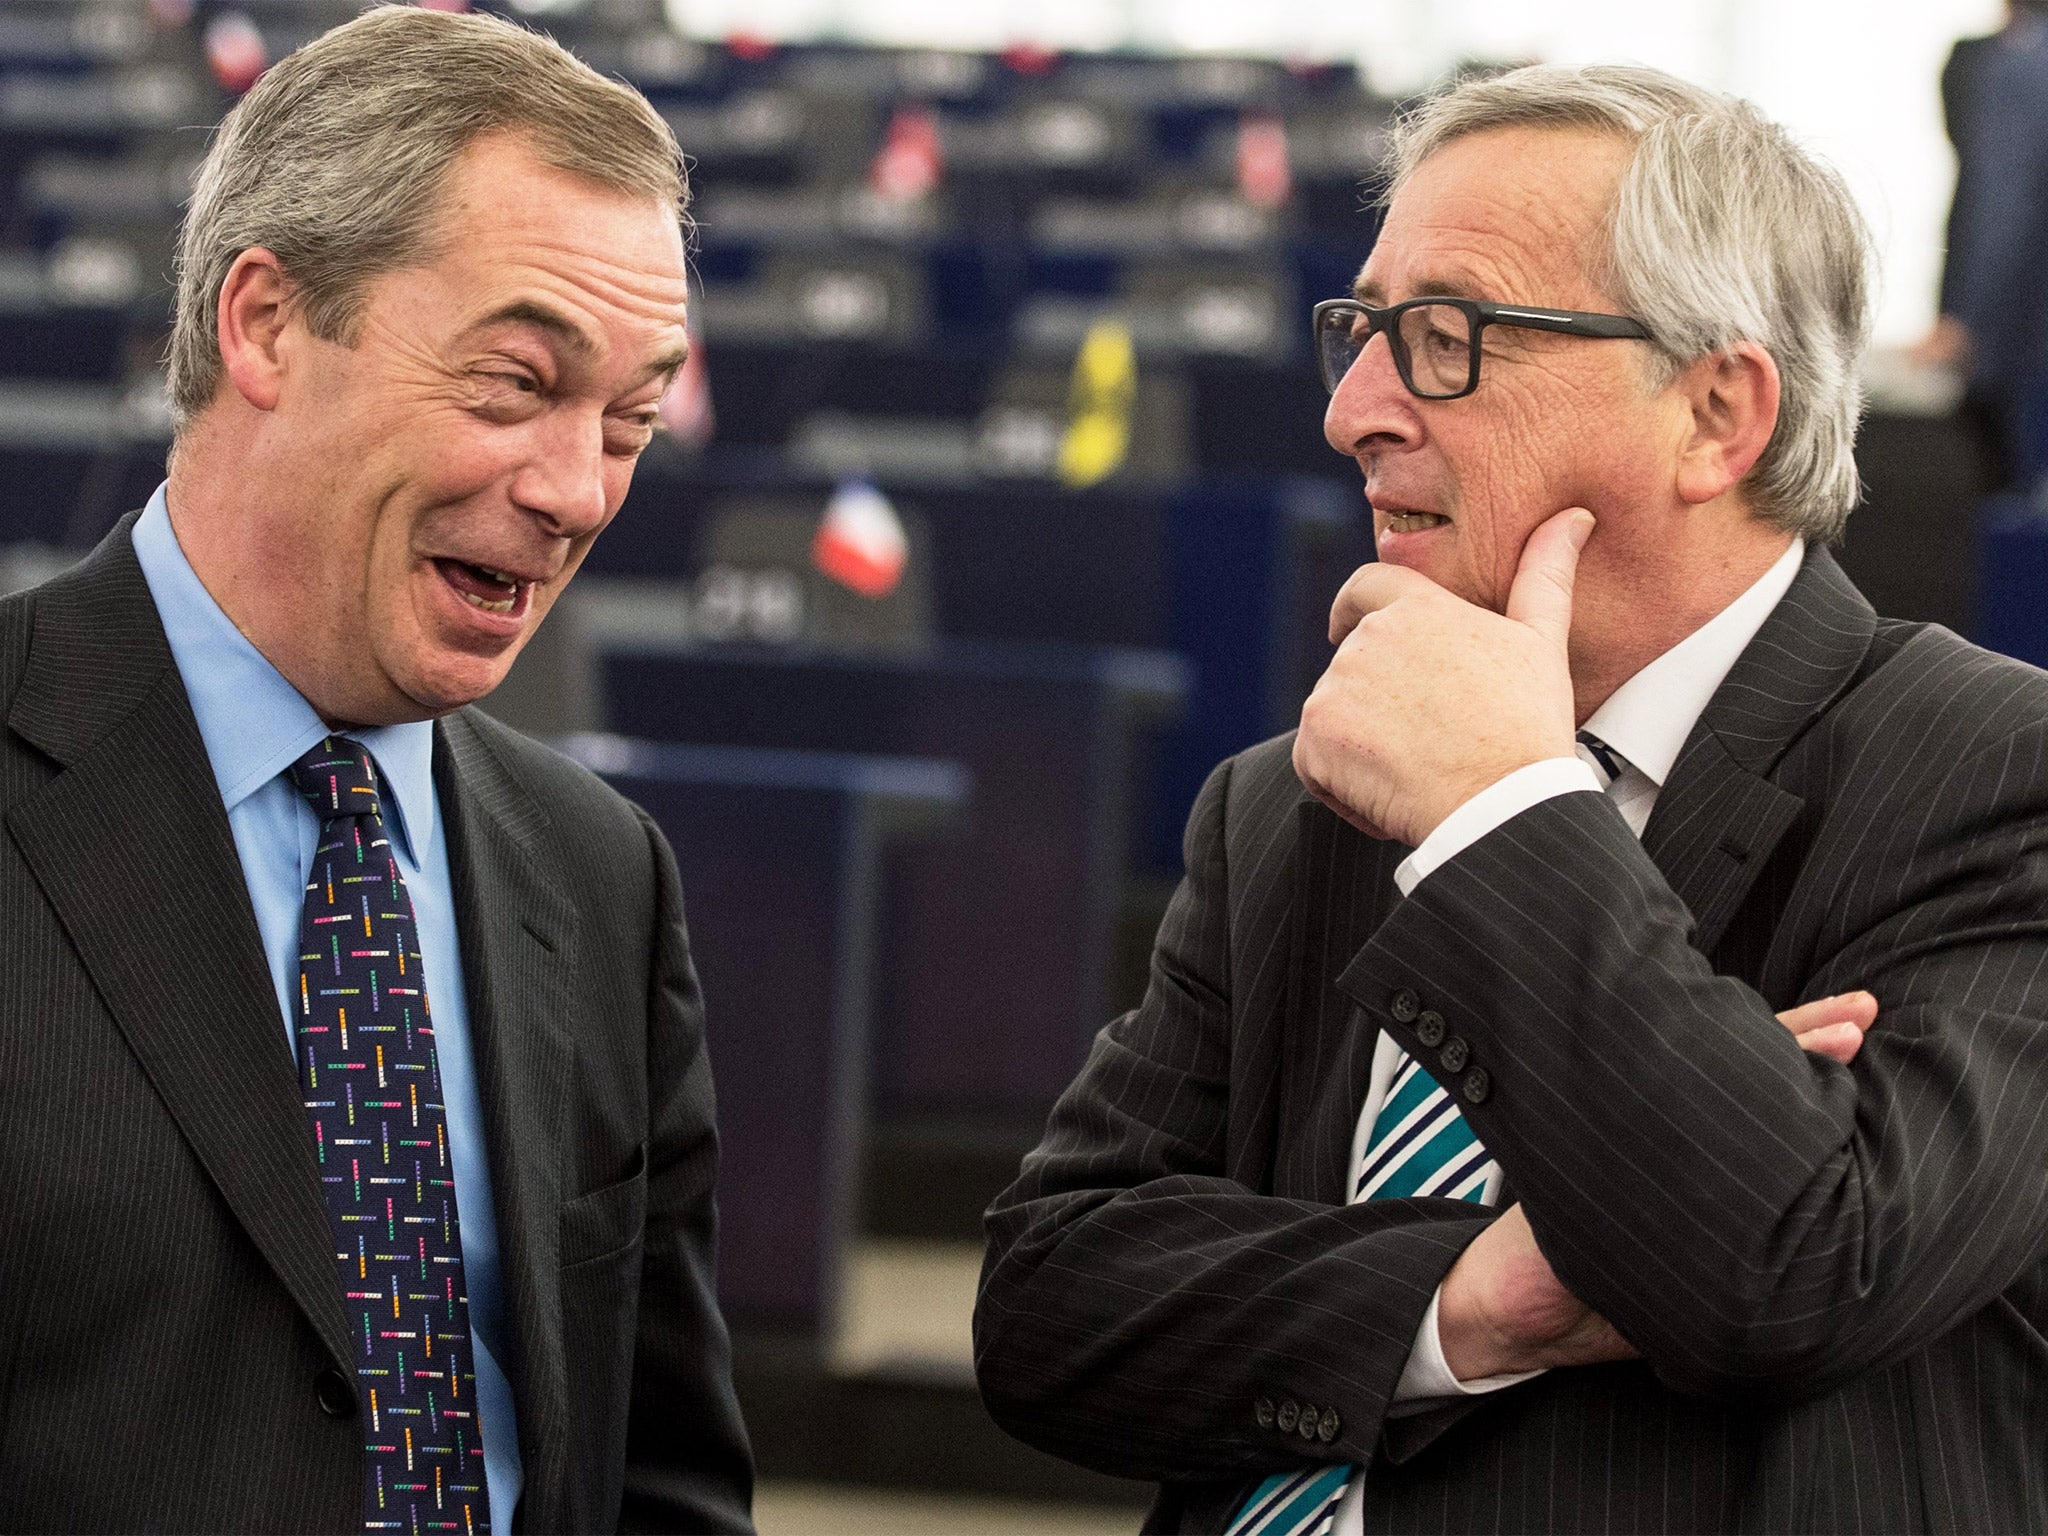 Nigel Farage (left) with the President of the European Commission, Jean-Claude Juncker